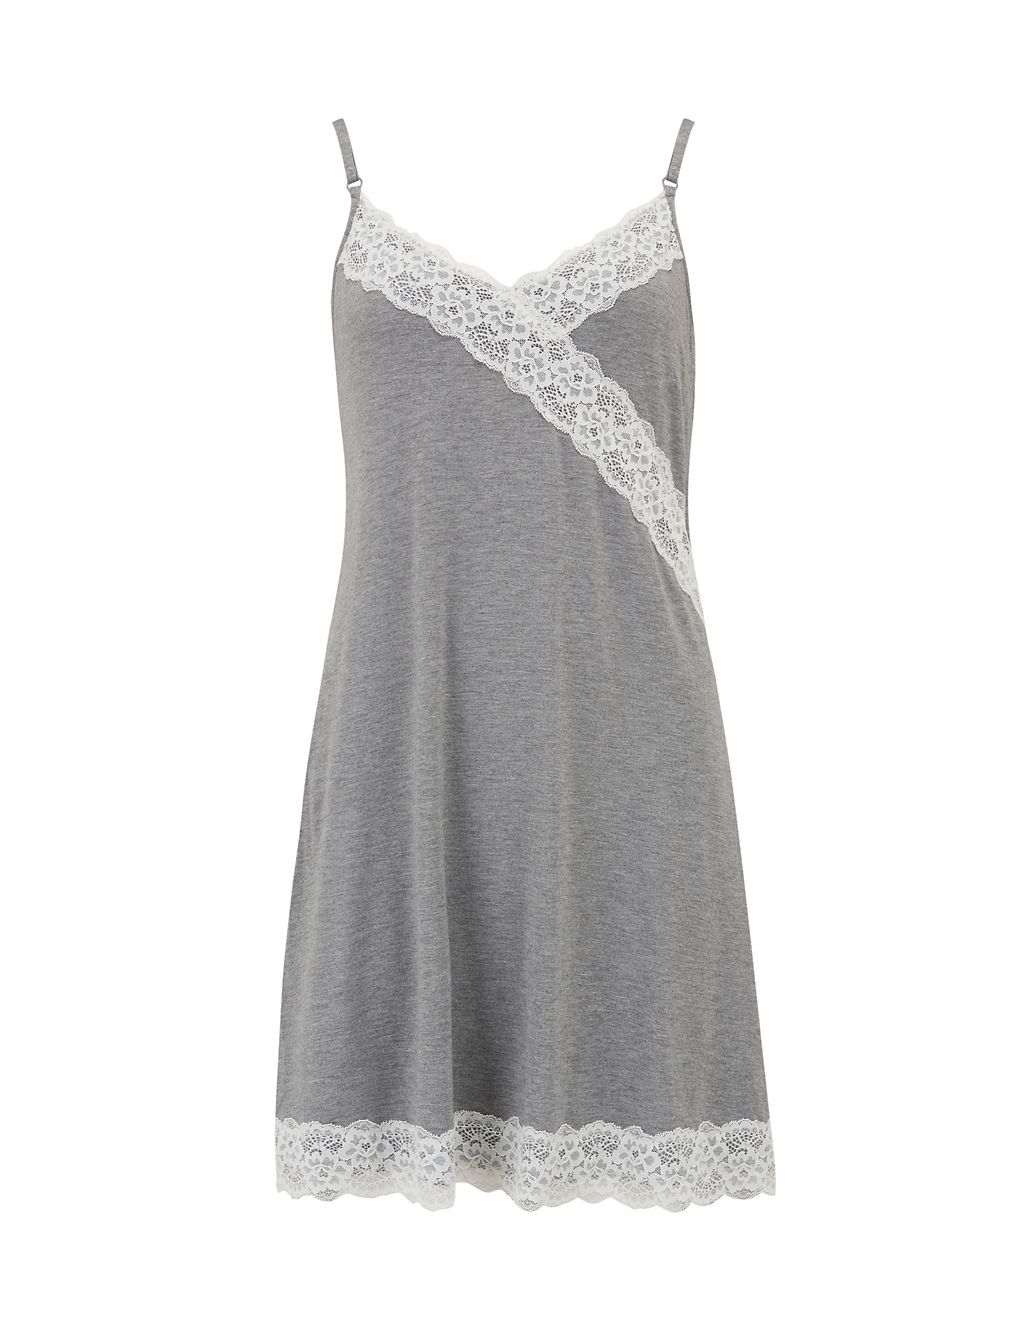 Sofa Loves Lace Hidden Support Jersey Chemise 1 of 5